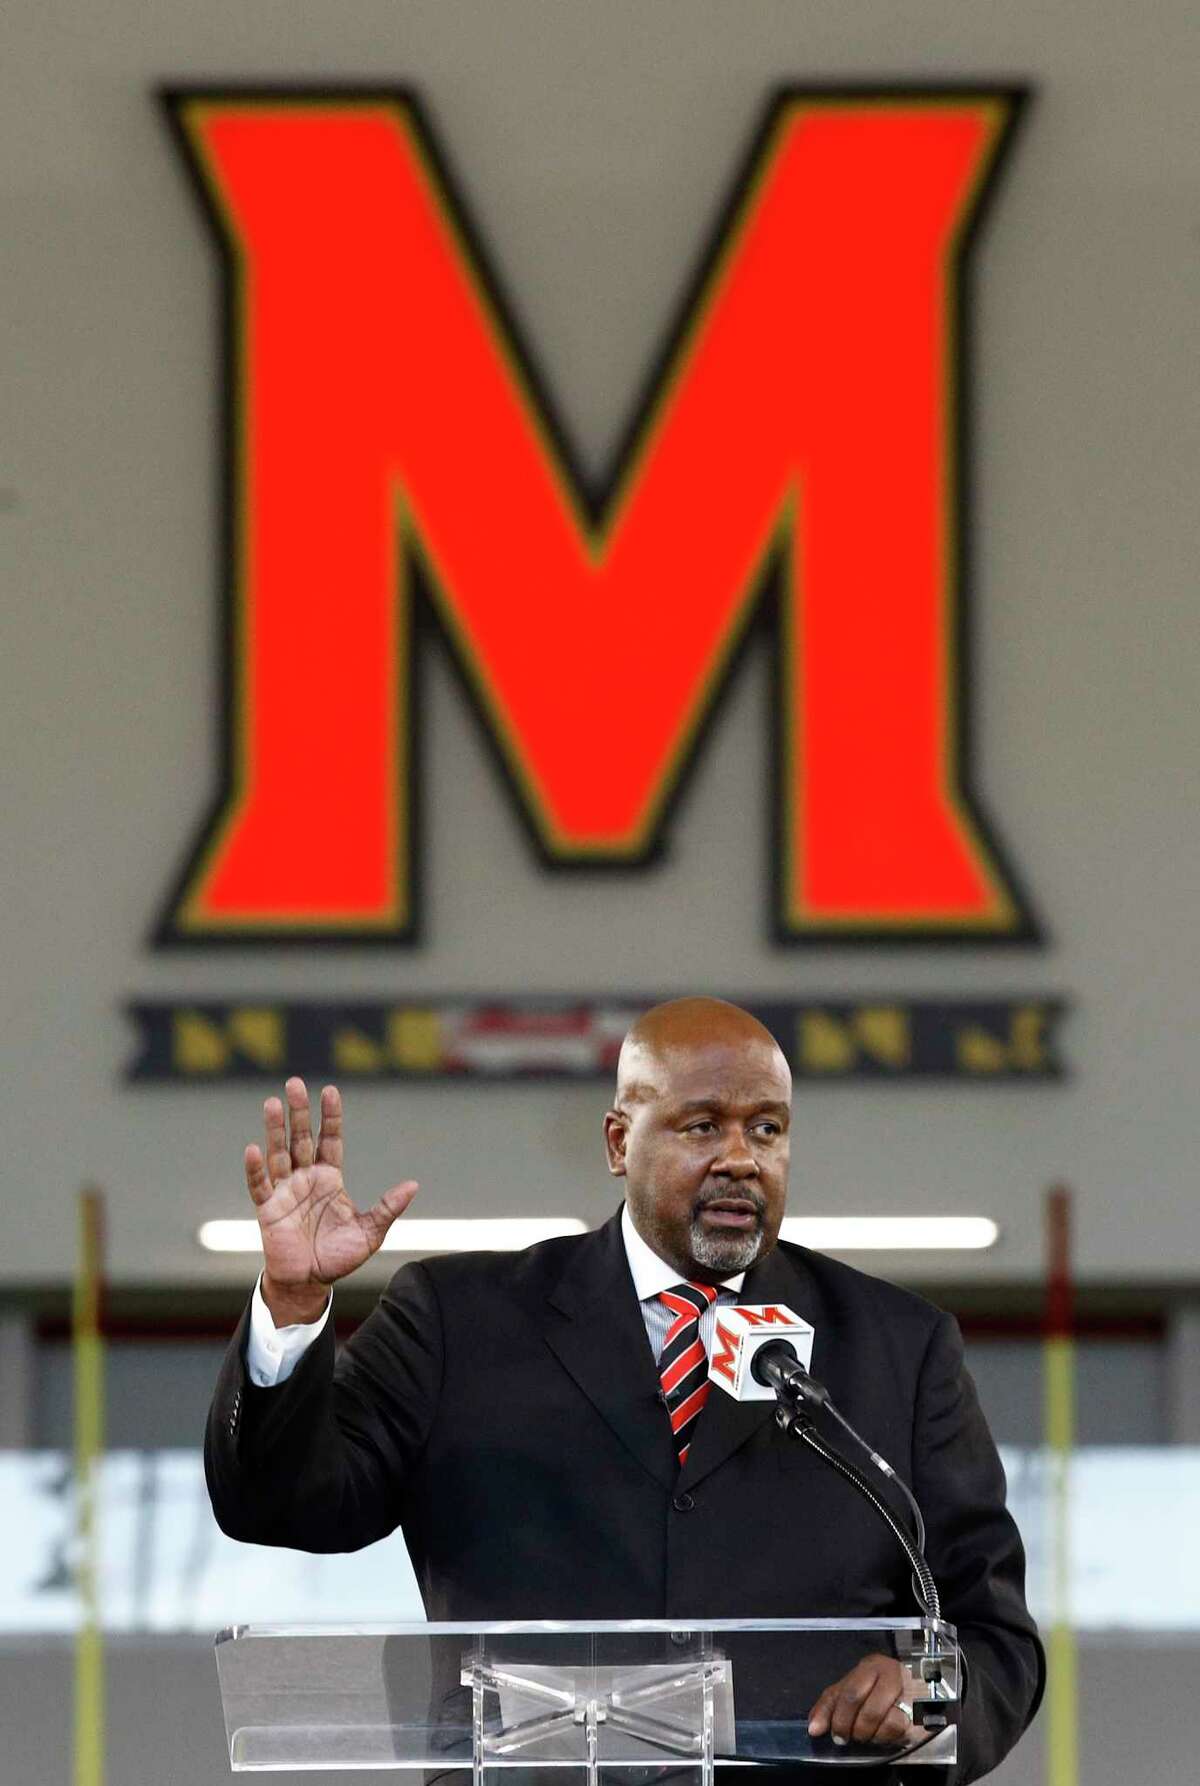 Maryland's New head football coach Mike Locksley speaks at an NCAA college football news conference, Thursday, Dec. 6, 2018, in College Park, Md. Locksley, Alabama's offensive coordinator, will take over at Maryland after the most tumultuous year in the program's recent history. (AP Photo/Patrick Semansky)